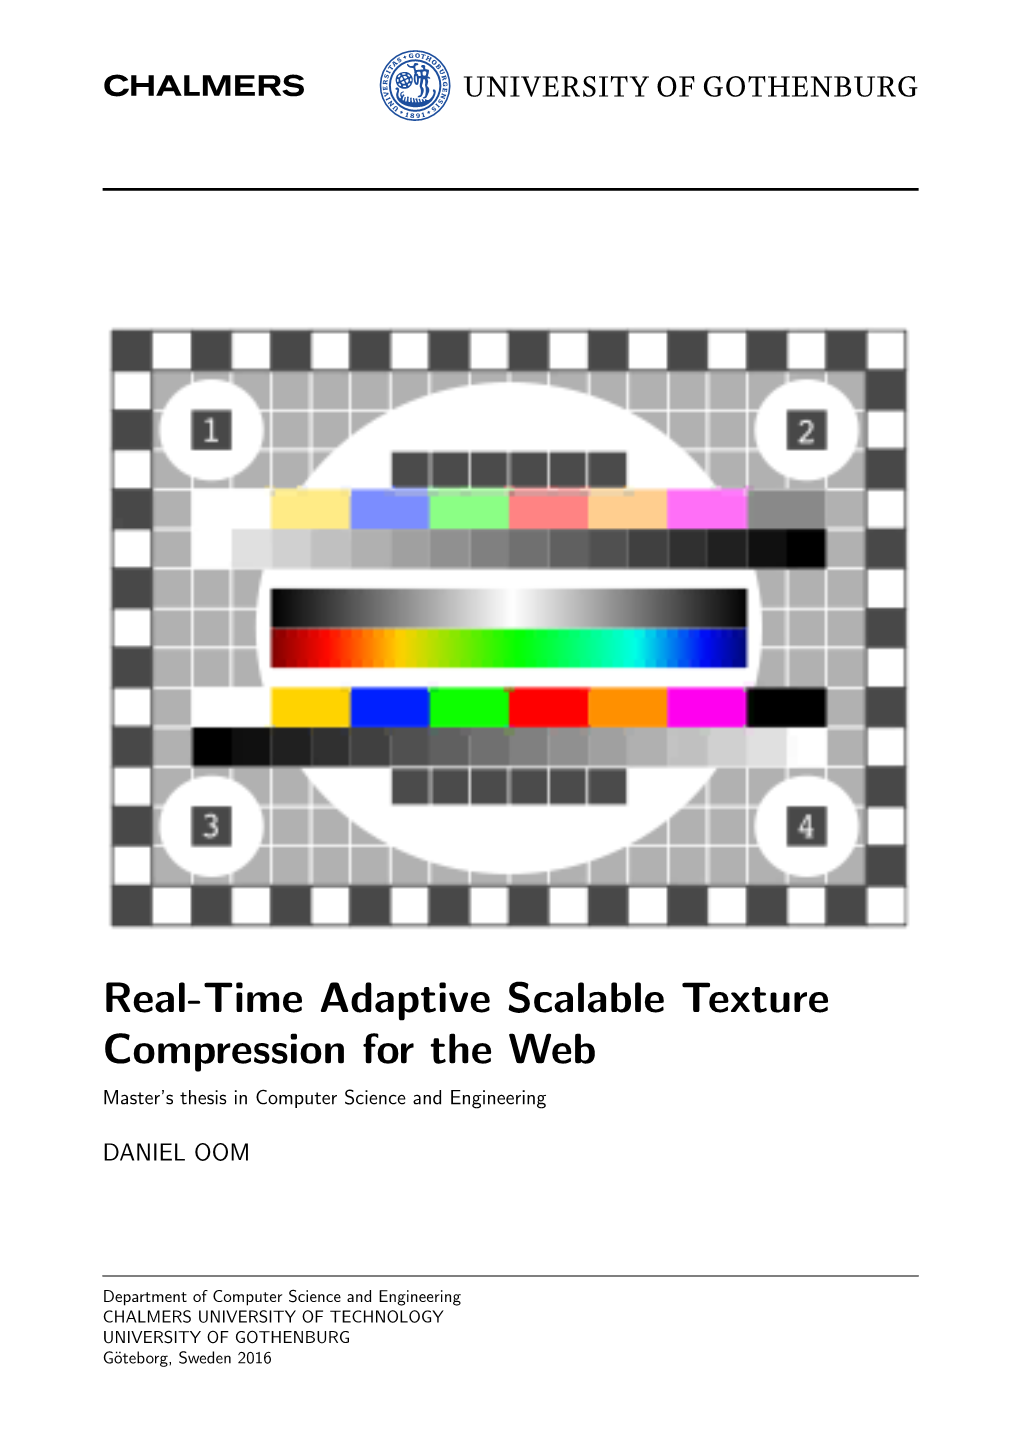 Real-Time Adaptive Scalable Texture Compression for the Web Master’S Thesis in Computer Science and Engineering